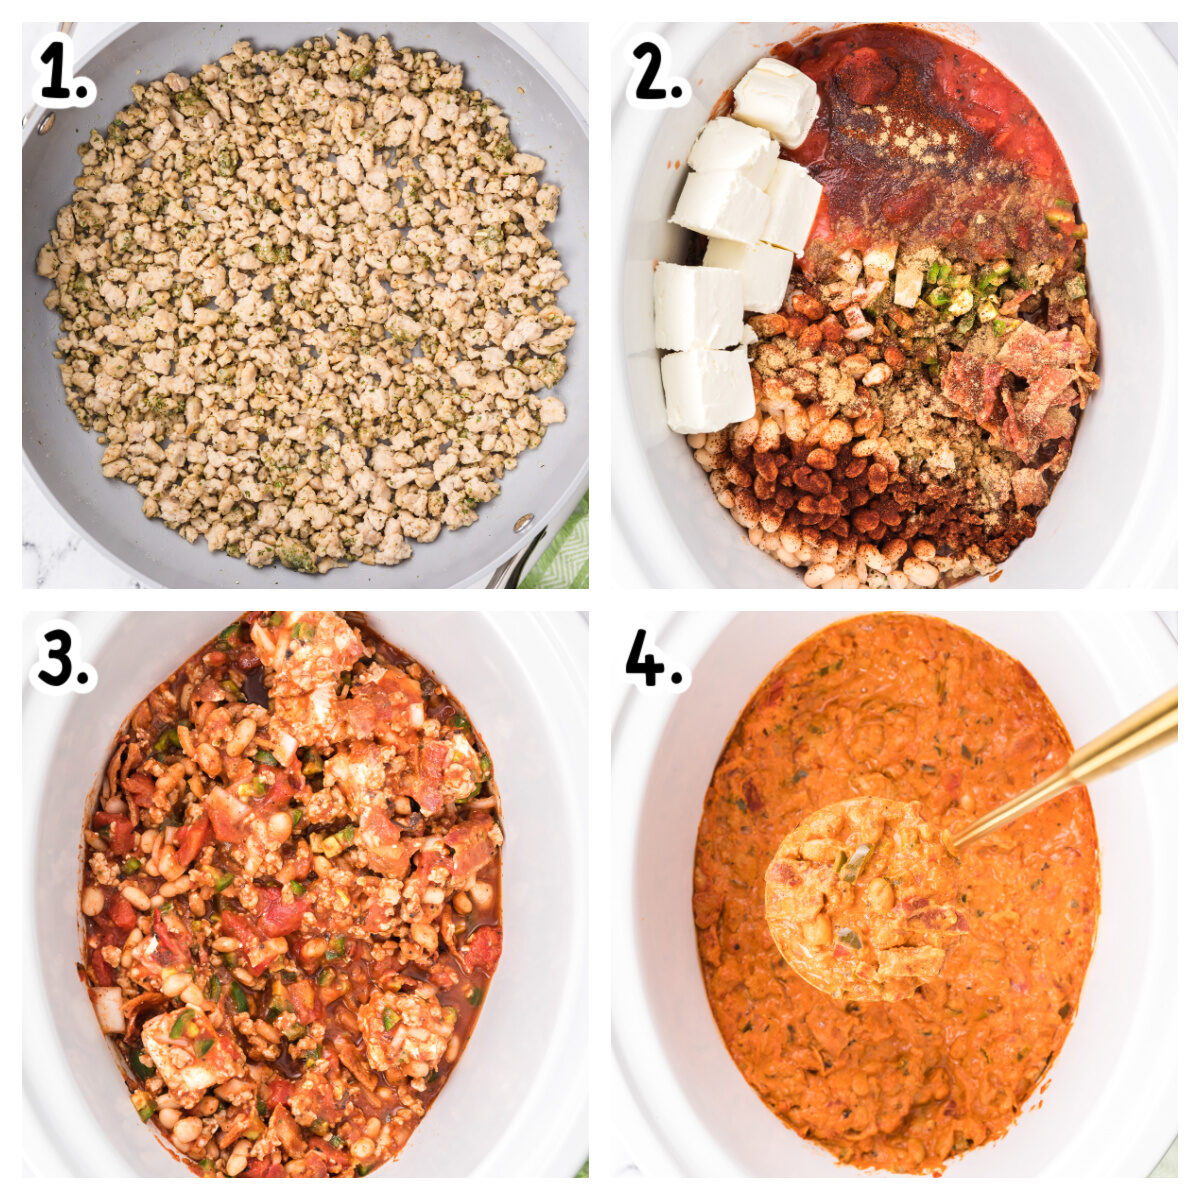 4 images showing how to make jalapeno popper chicken chili in a crockpot.